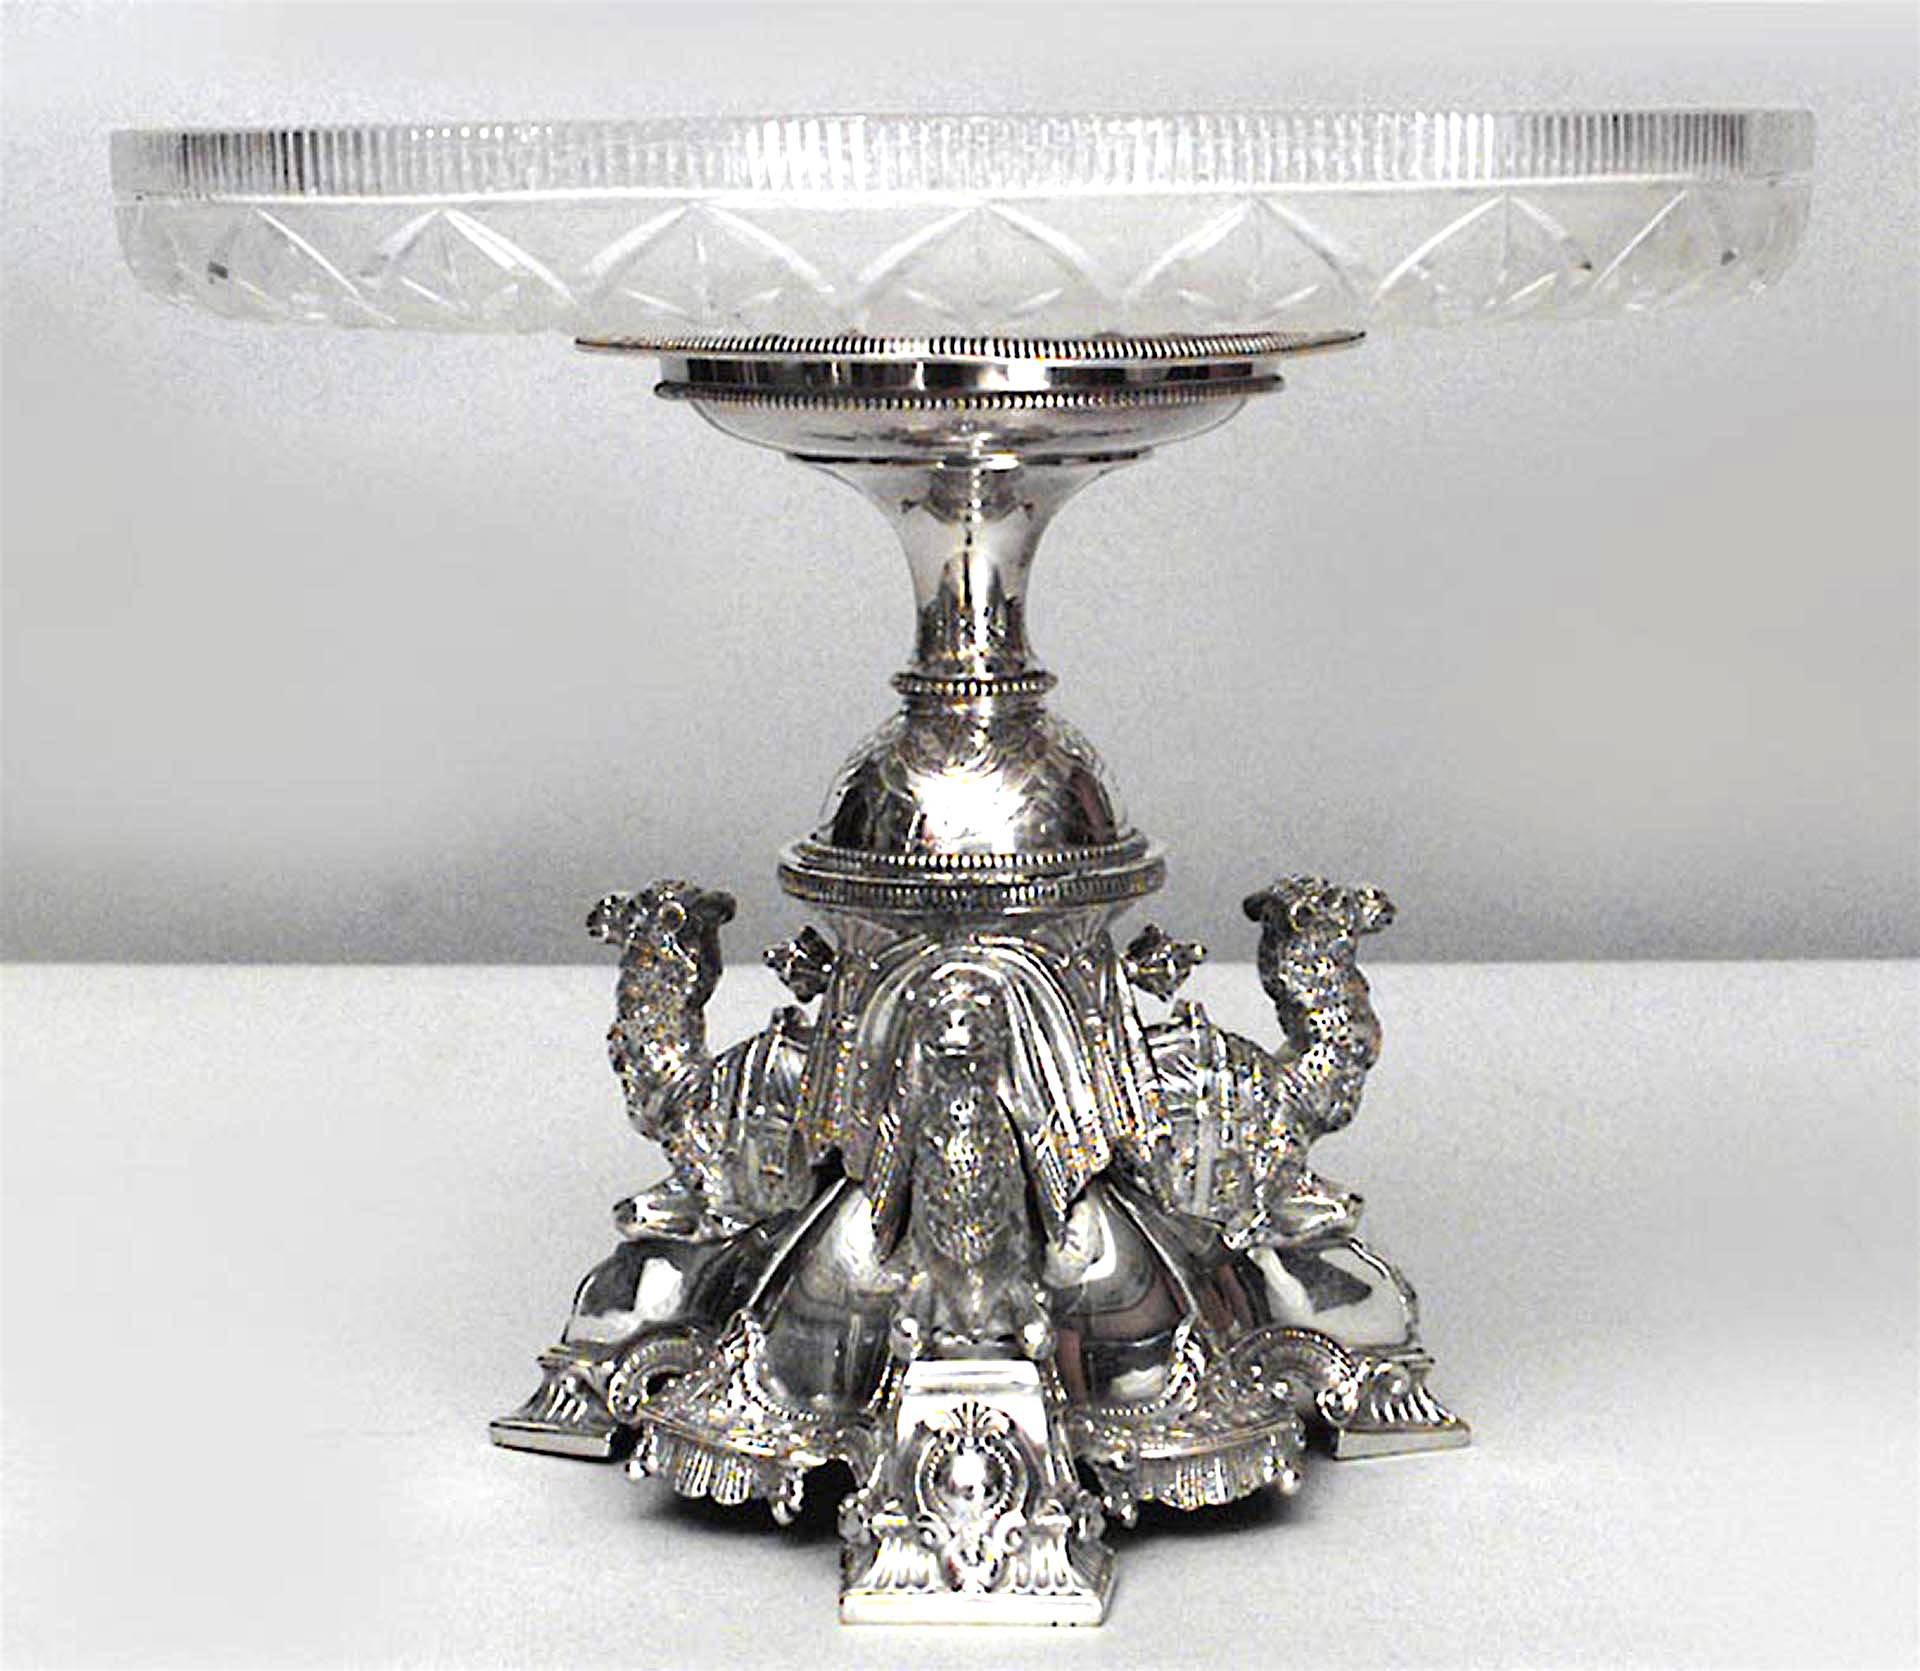 Pair of English Victorian (Dated 1865) silver plated centerpieces with camels kneeling on the tripartite base beneath a cut-glass dish (PRICED AS Pair)
